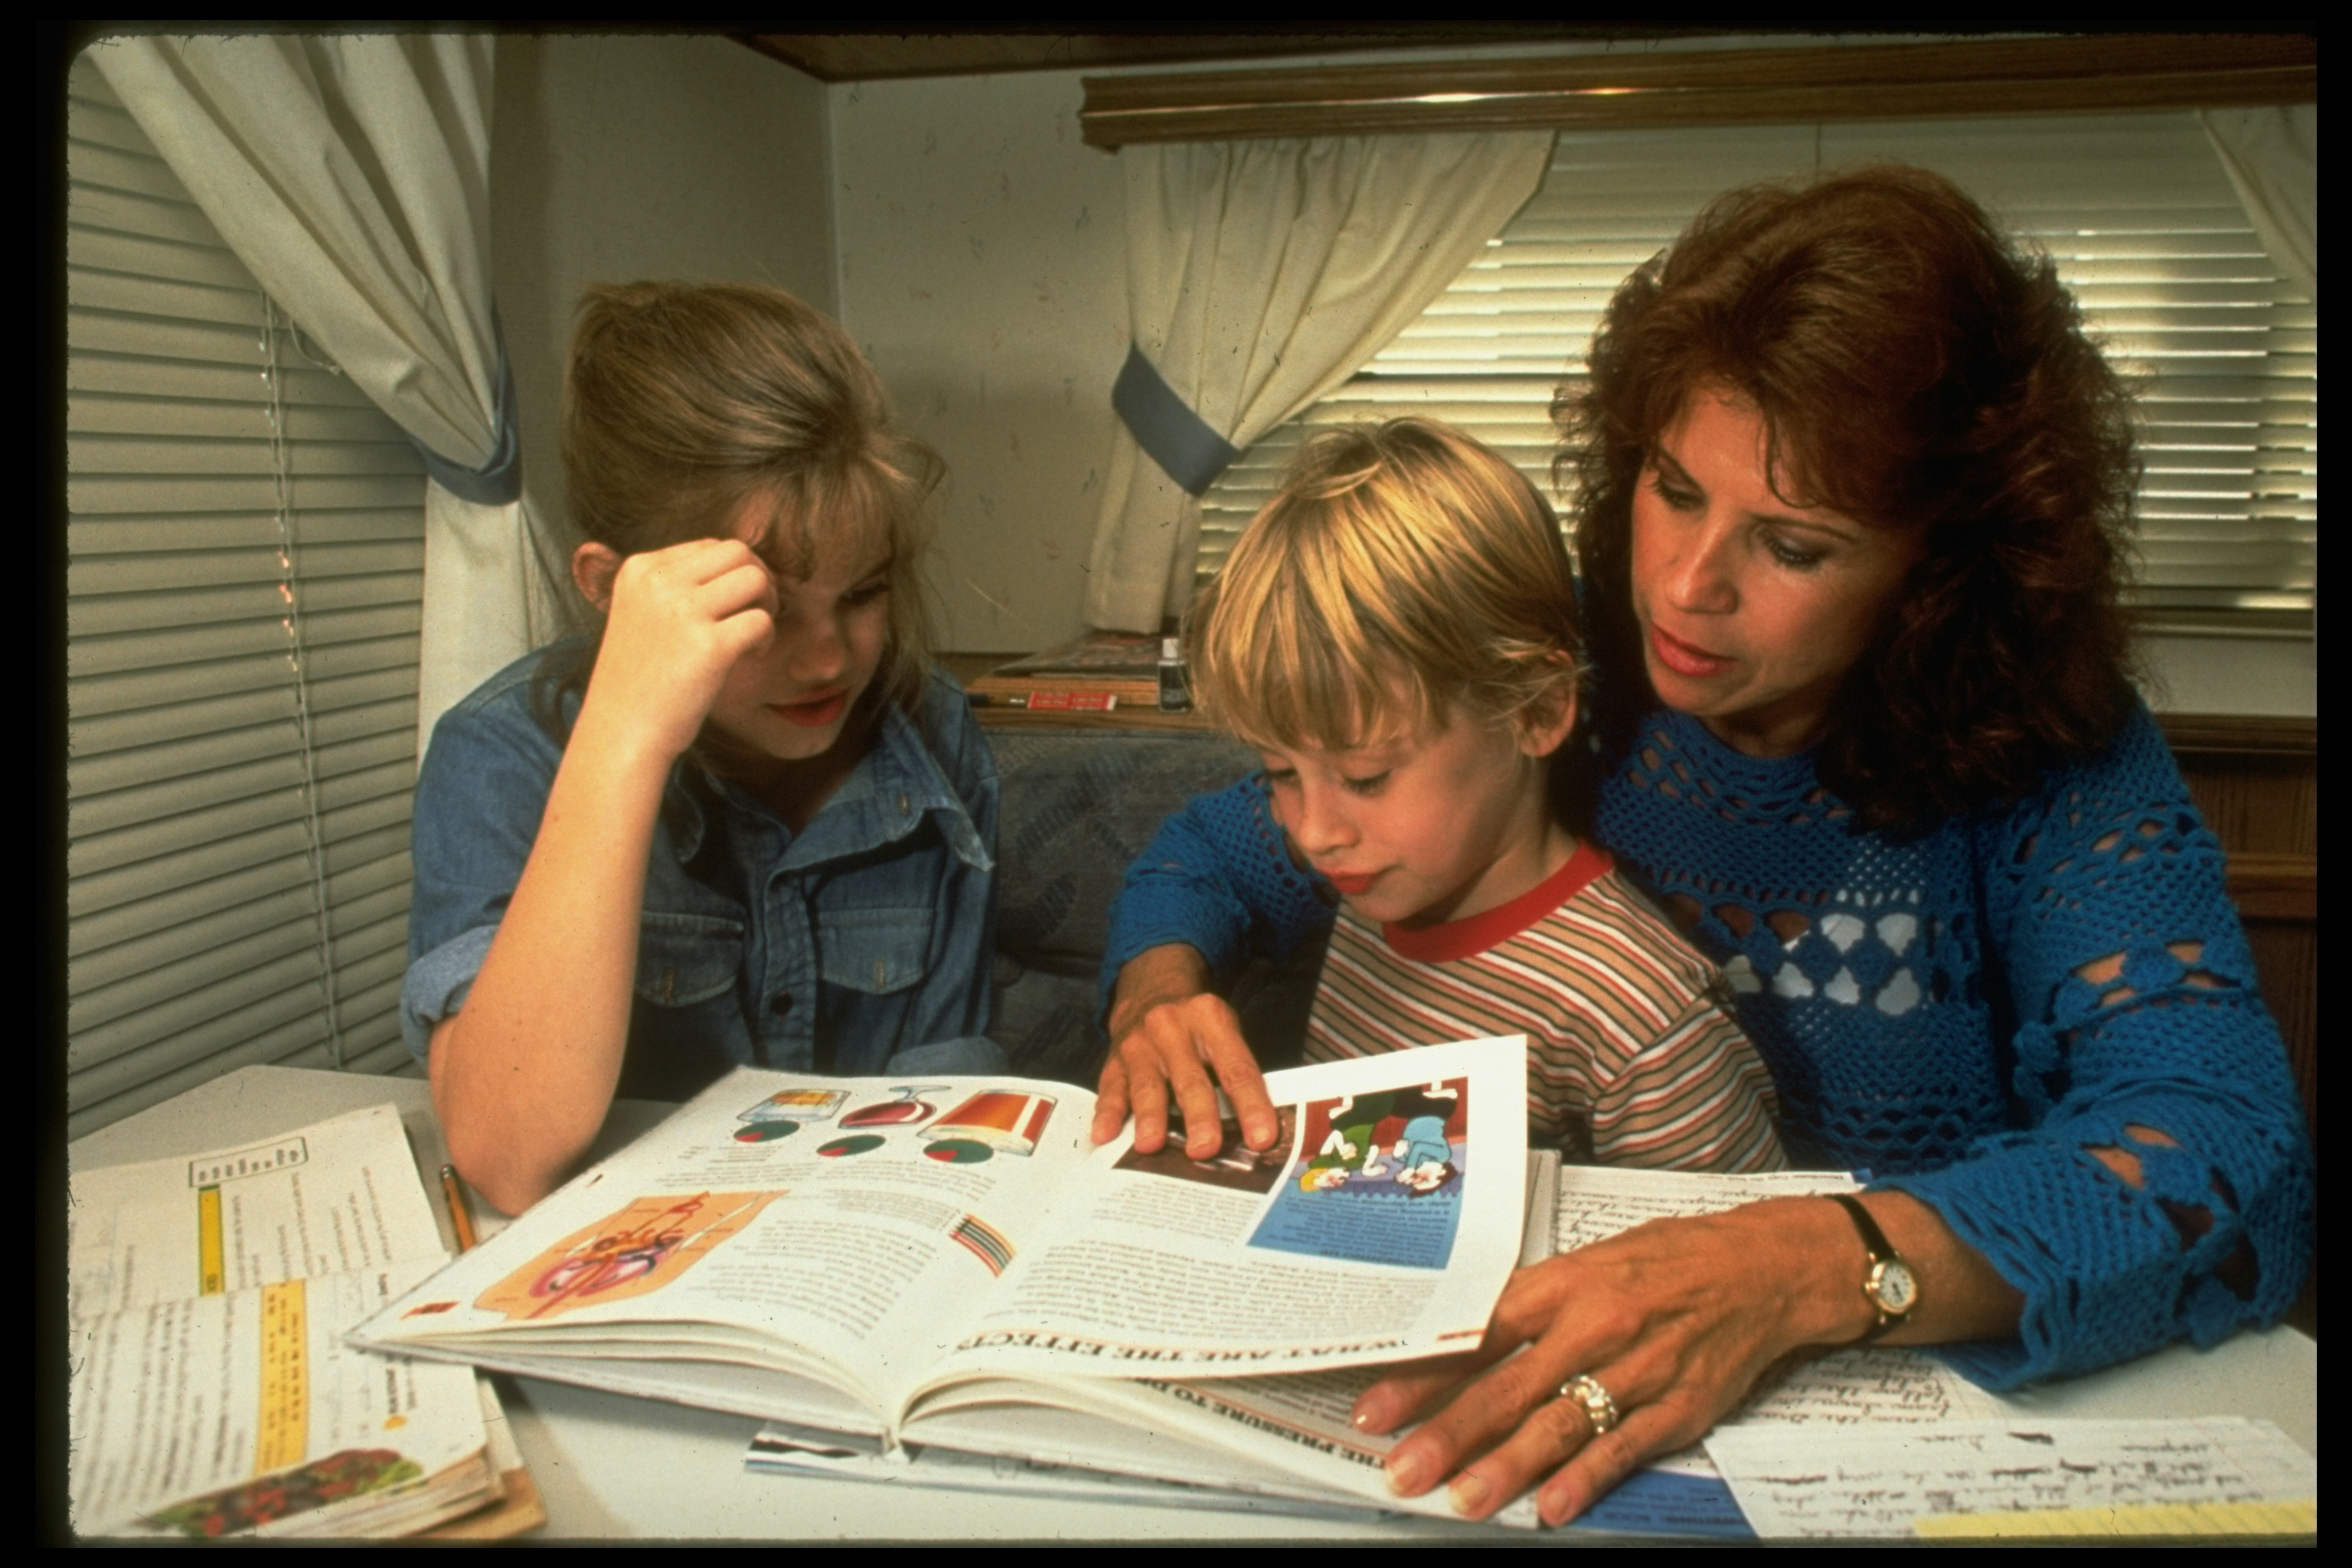 Anna Chlumsky and Macaulay Culkin working with their tutor Leah Girolami during the filming of "My Girl" in 1991 | Source: Getty Images